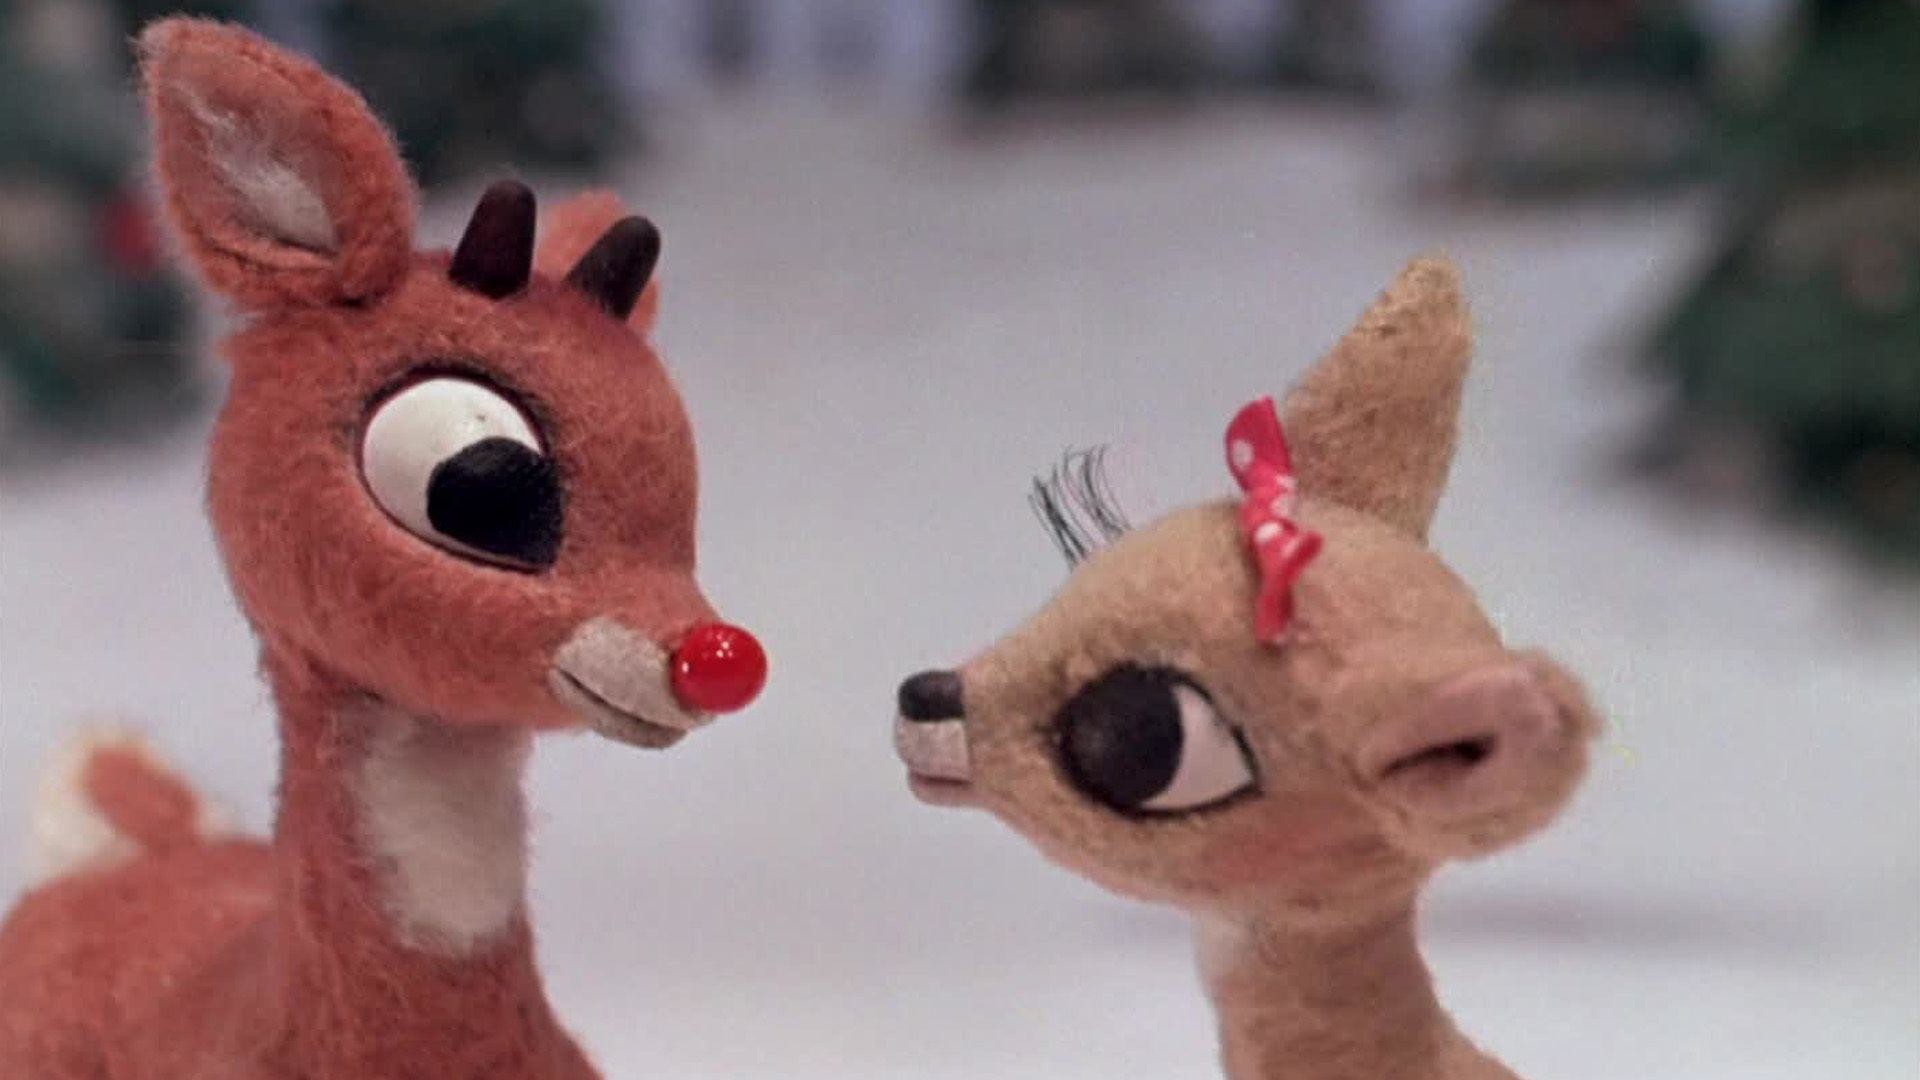 1920x1080, Rudolph The Red Nosed Reindeer Wallpaper - Rudolph The Red Nosed Reindeer - HD Wallpaper 